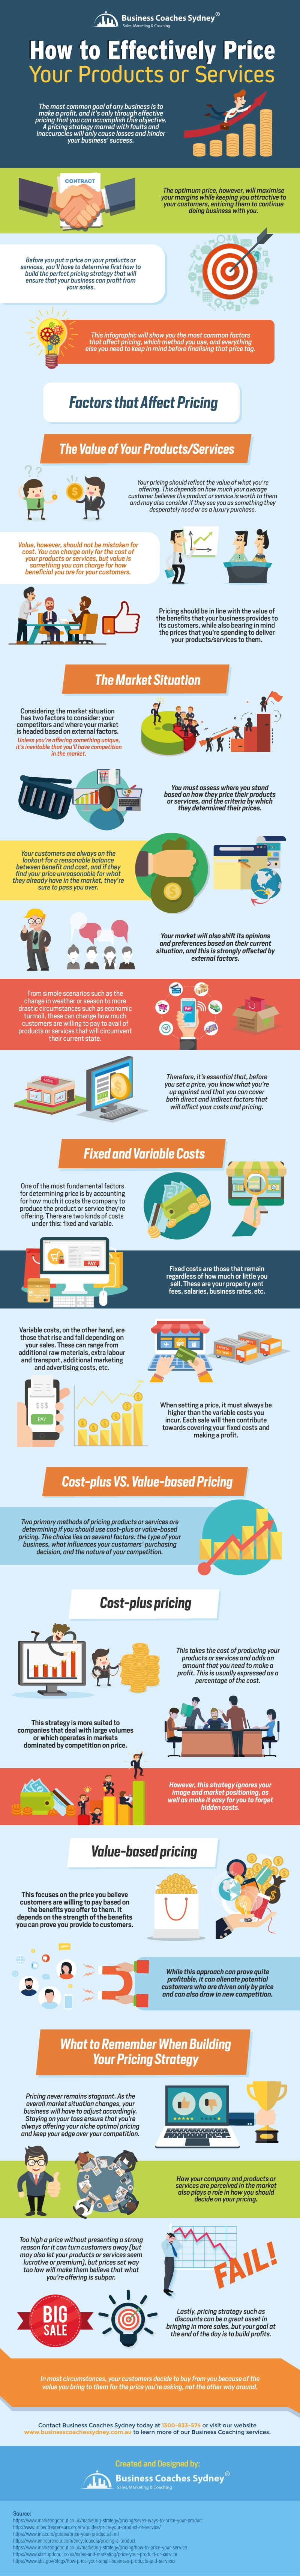 What’s the Right Price? Pricing Strategies in a Nutshell - Infographic